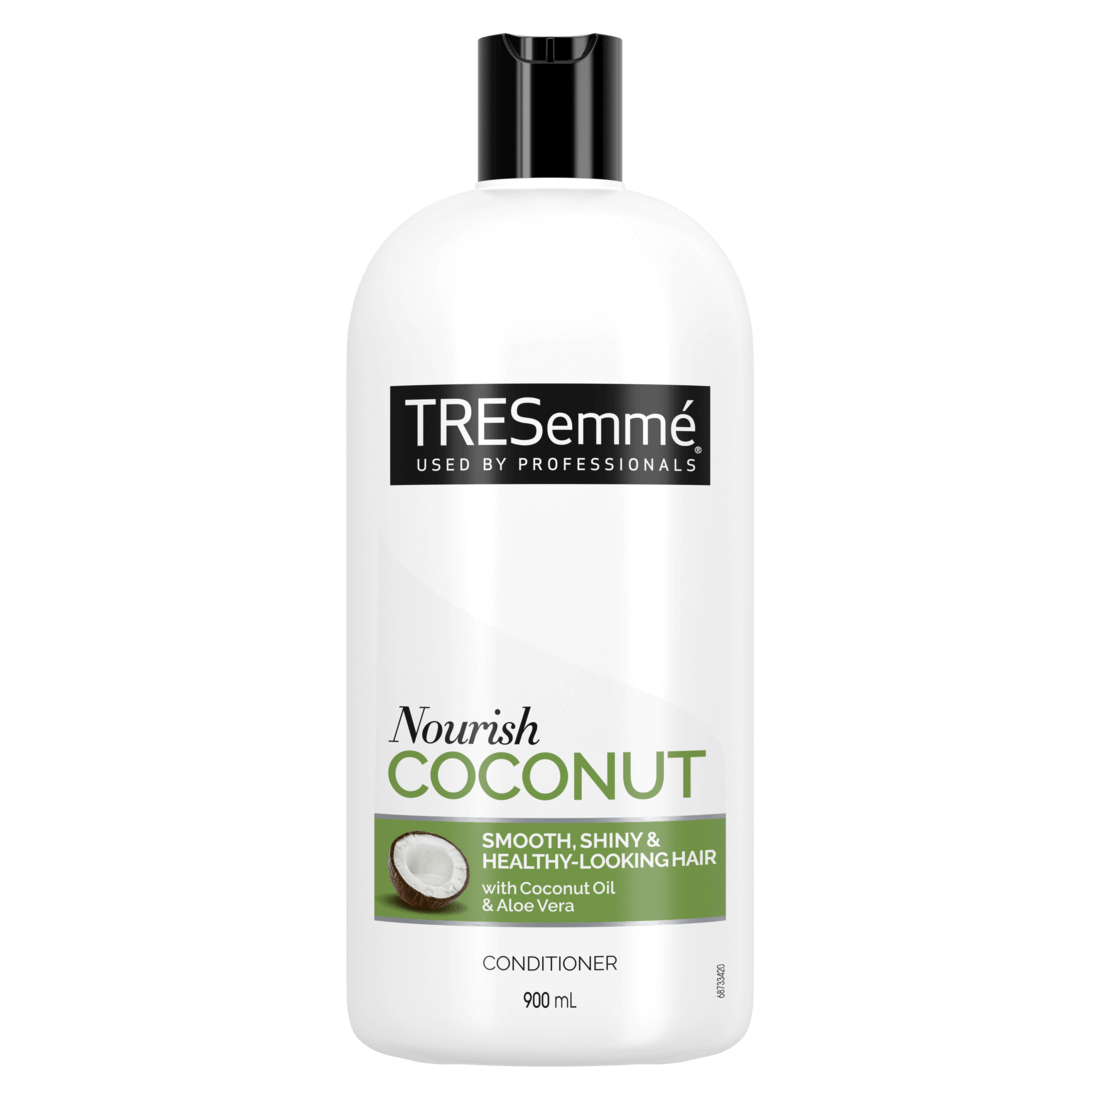 A 900ml bottle of TRESemmé Nourish Coconut Conditioner front of pack image